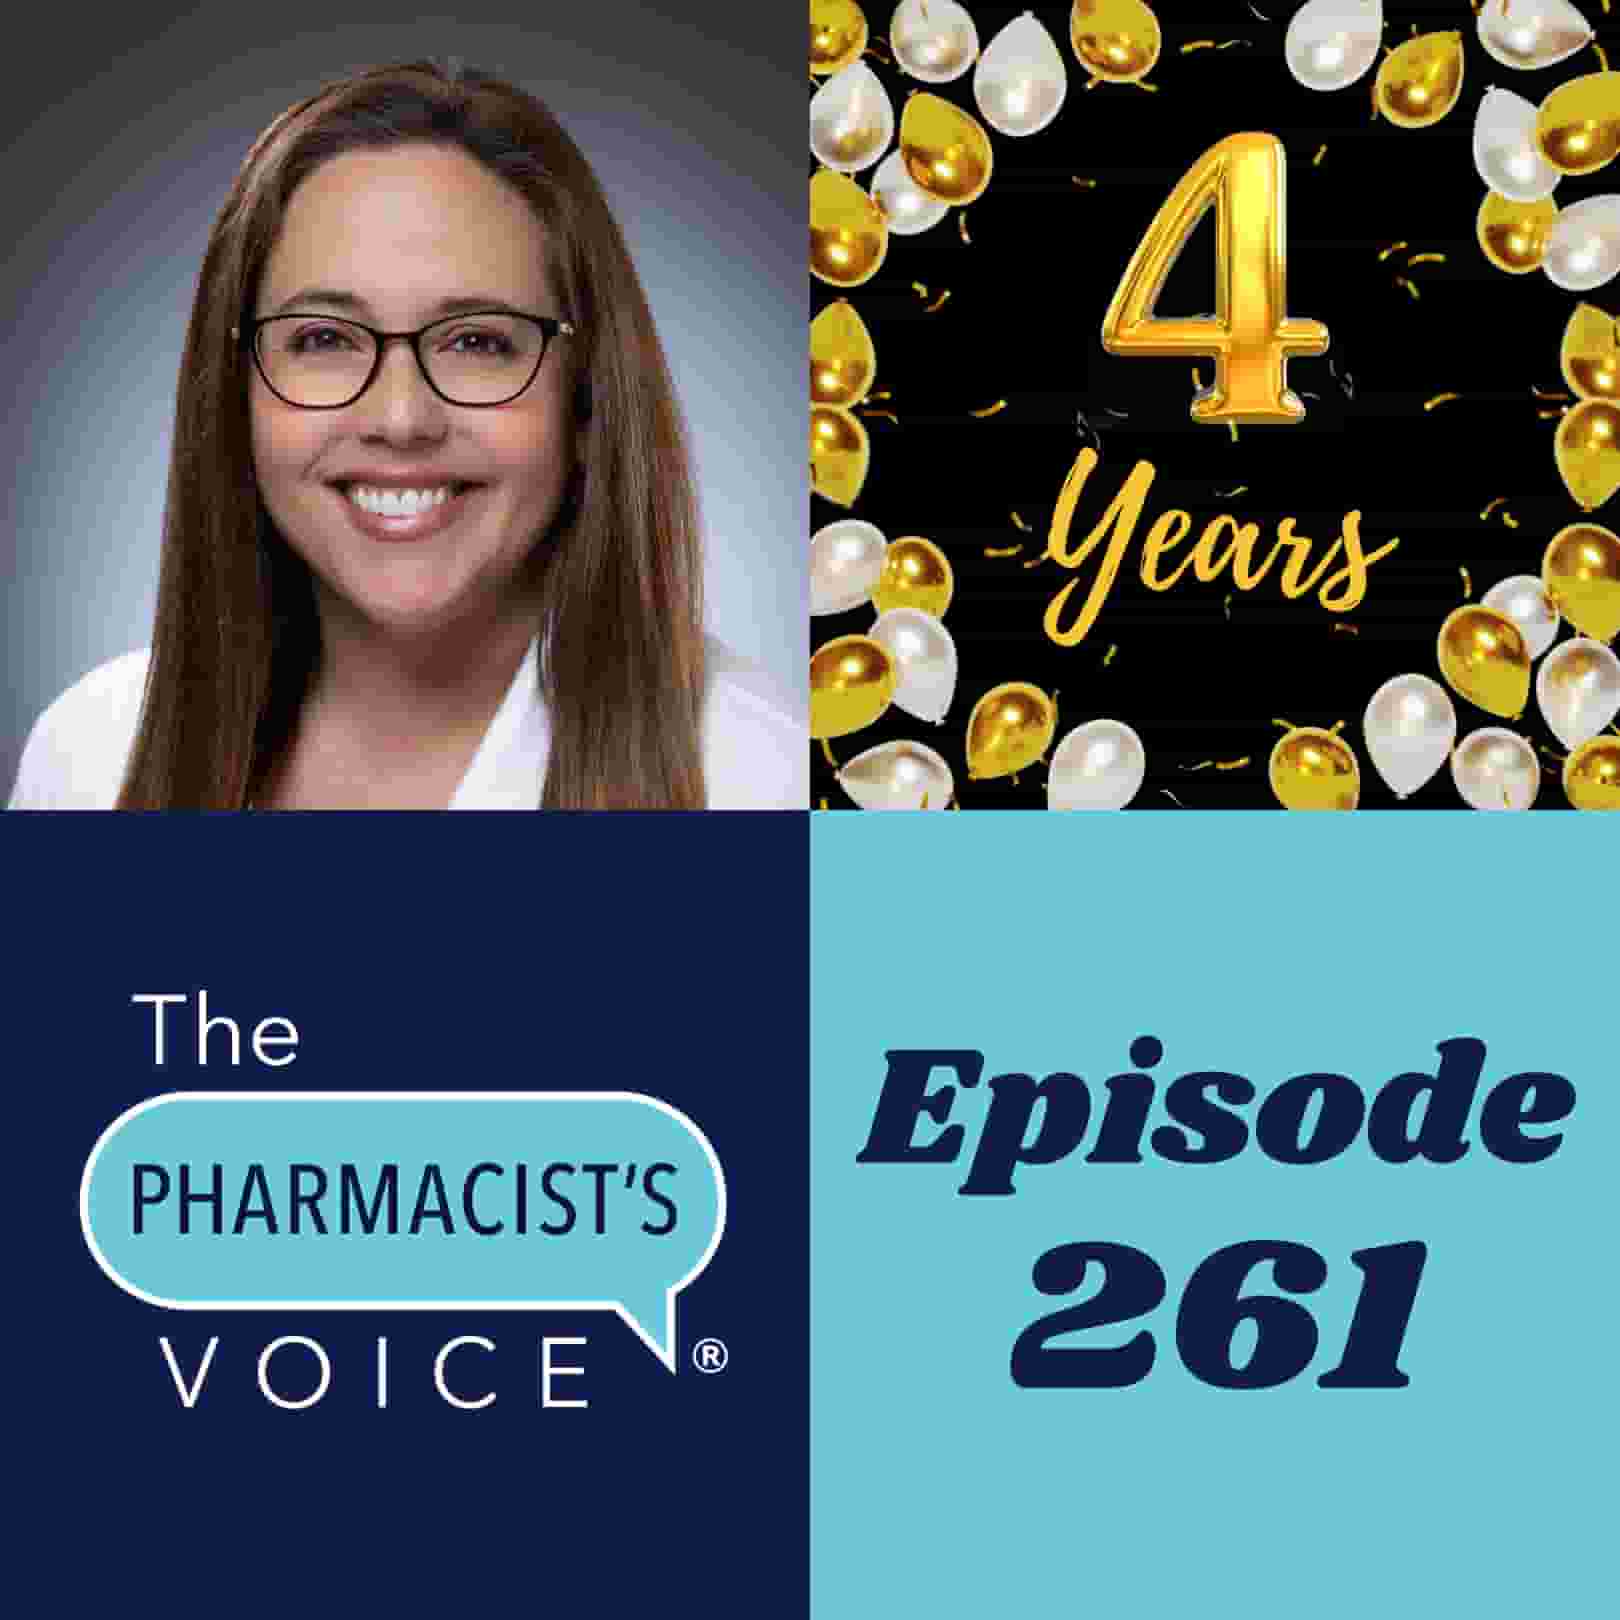 The Pharmacist's Voice Podcast Episode 261. Celebrating 4 years in podcasting!